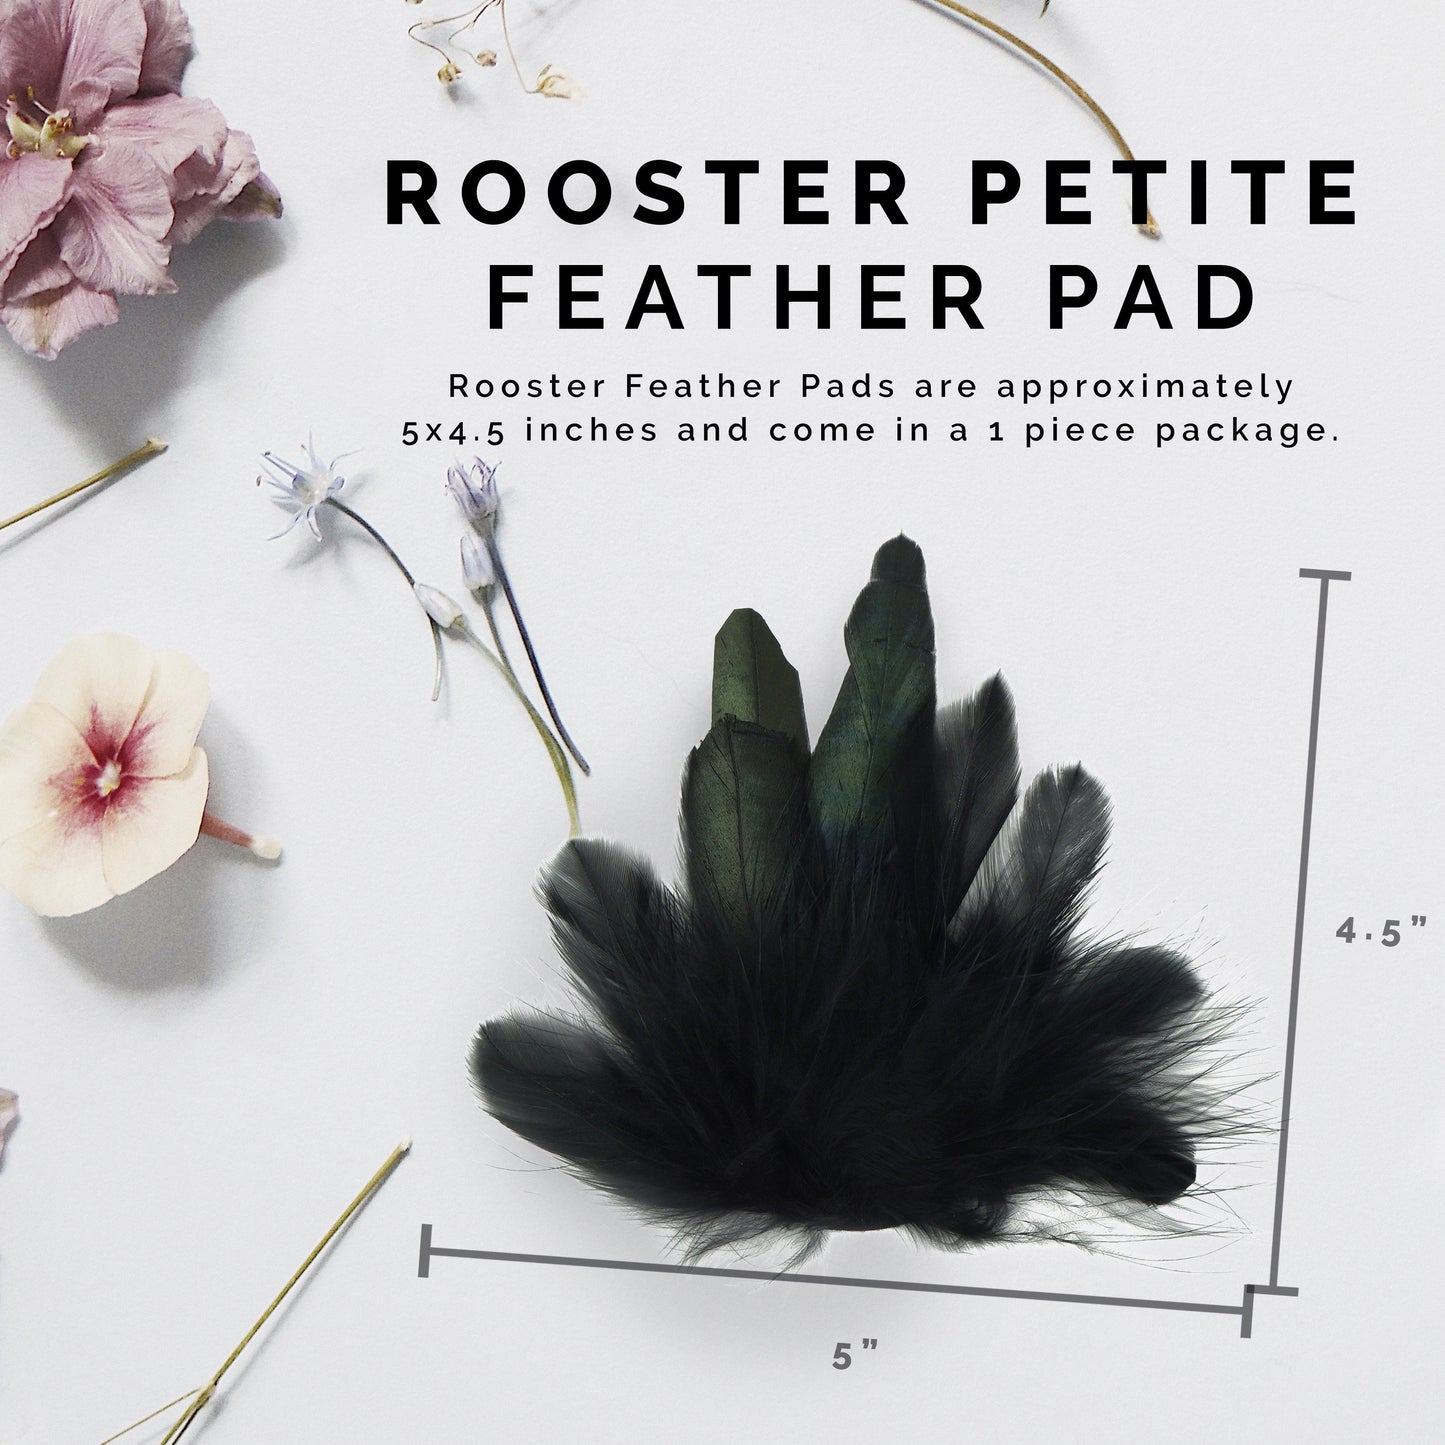 Rooster Petite Feather Pad - Natural